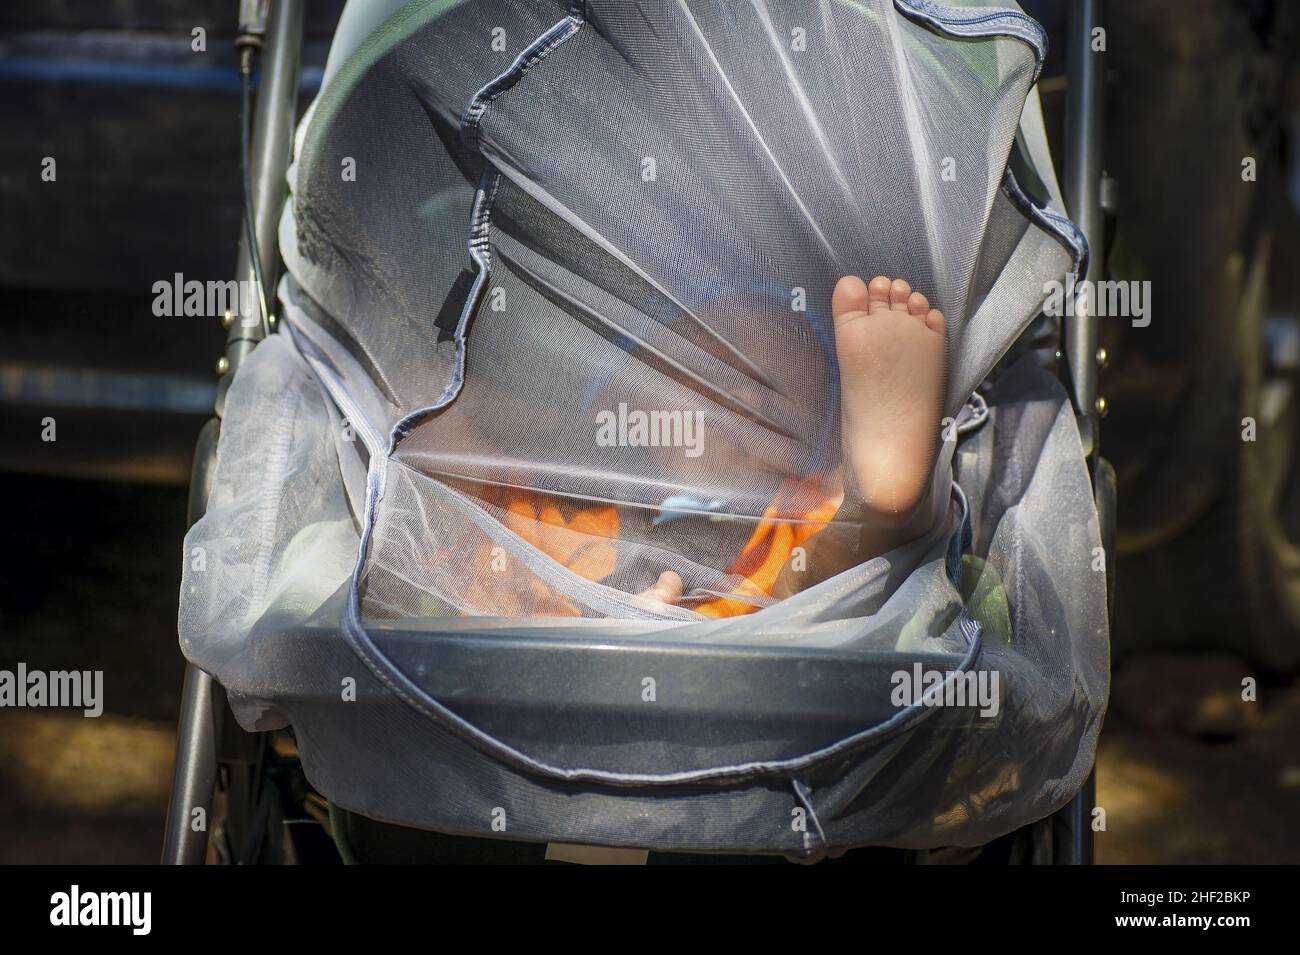 The baby's foot rested against the mosquito net on the stroller Stock Photo